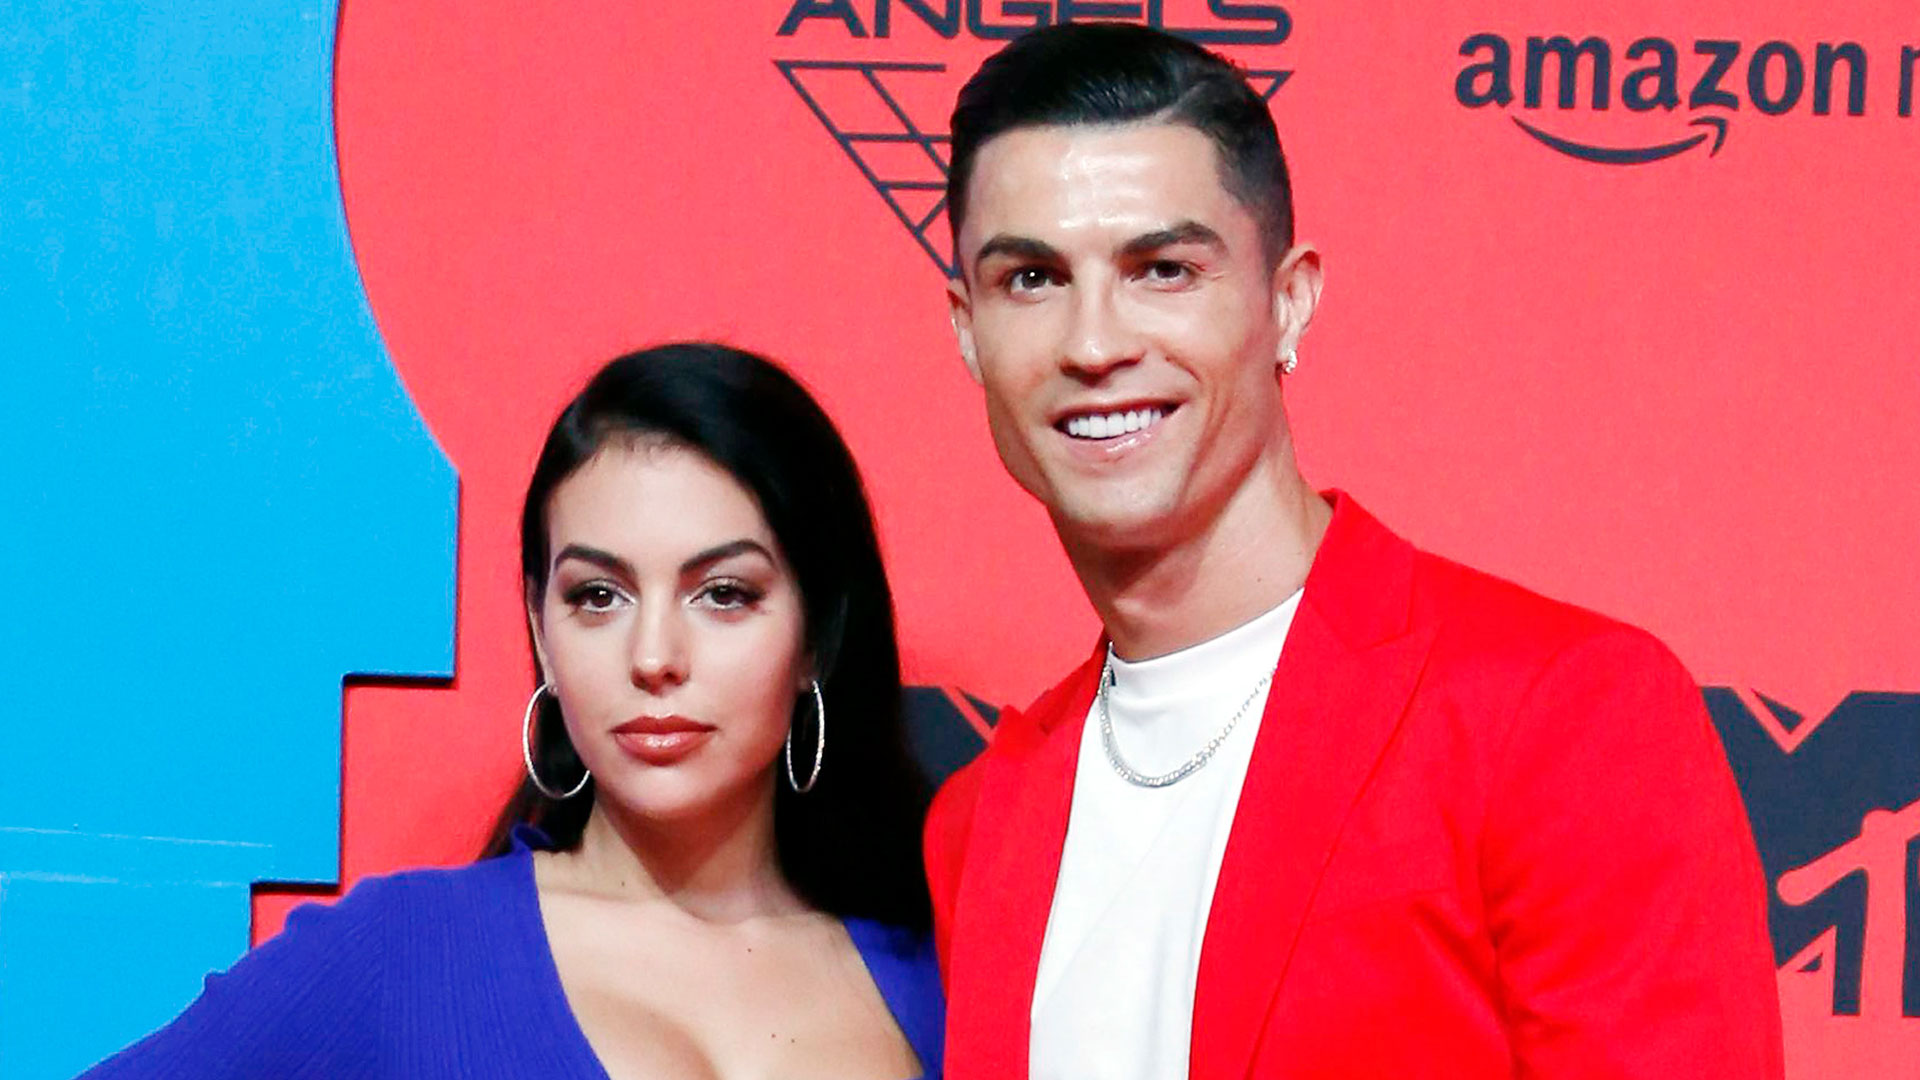 Cristiano Ronaldo Reveals Sex Of His And Georgina Rodriguezs Twins On The Way In Sweet Family Video image